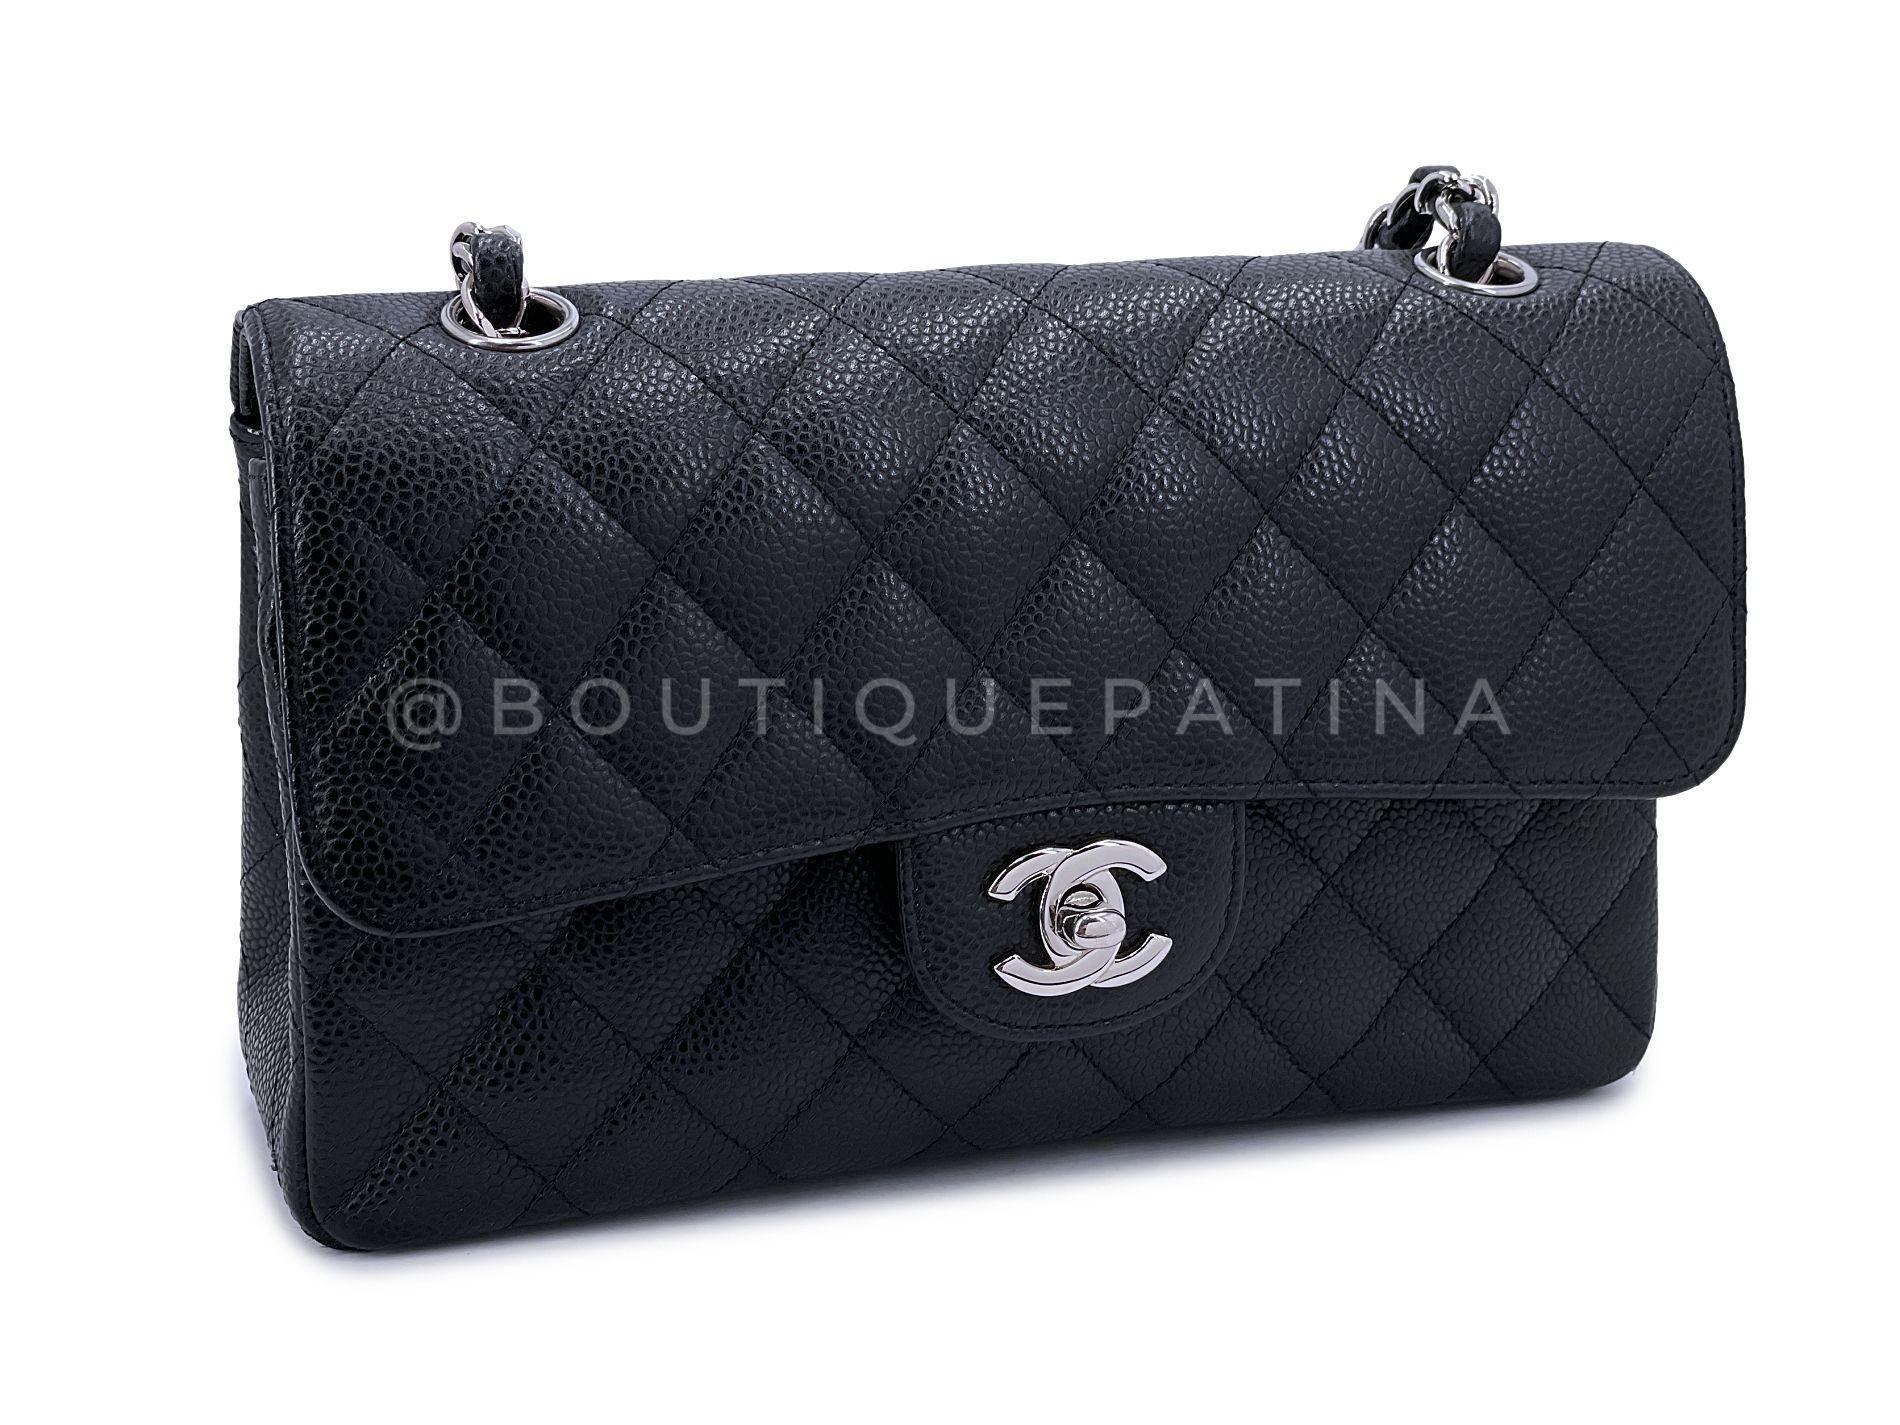 Chanel Black Caviar Small Classic Double Flap Bag SHW 67981 In Excellent Condition For Sale In Costa Mesa, CA